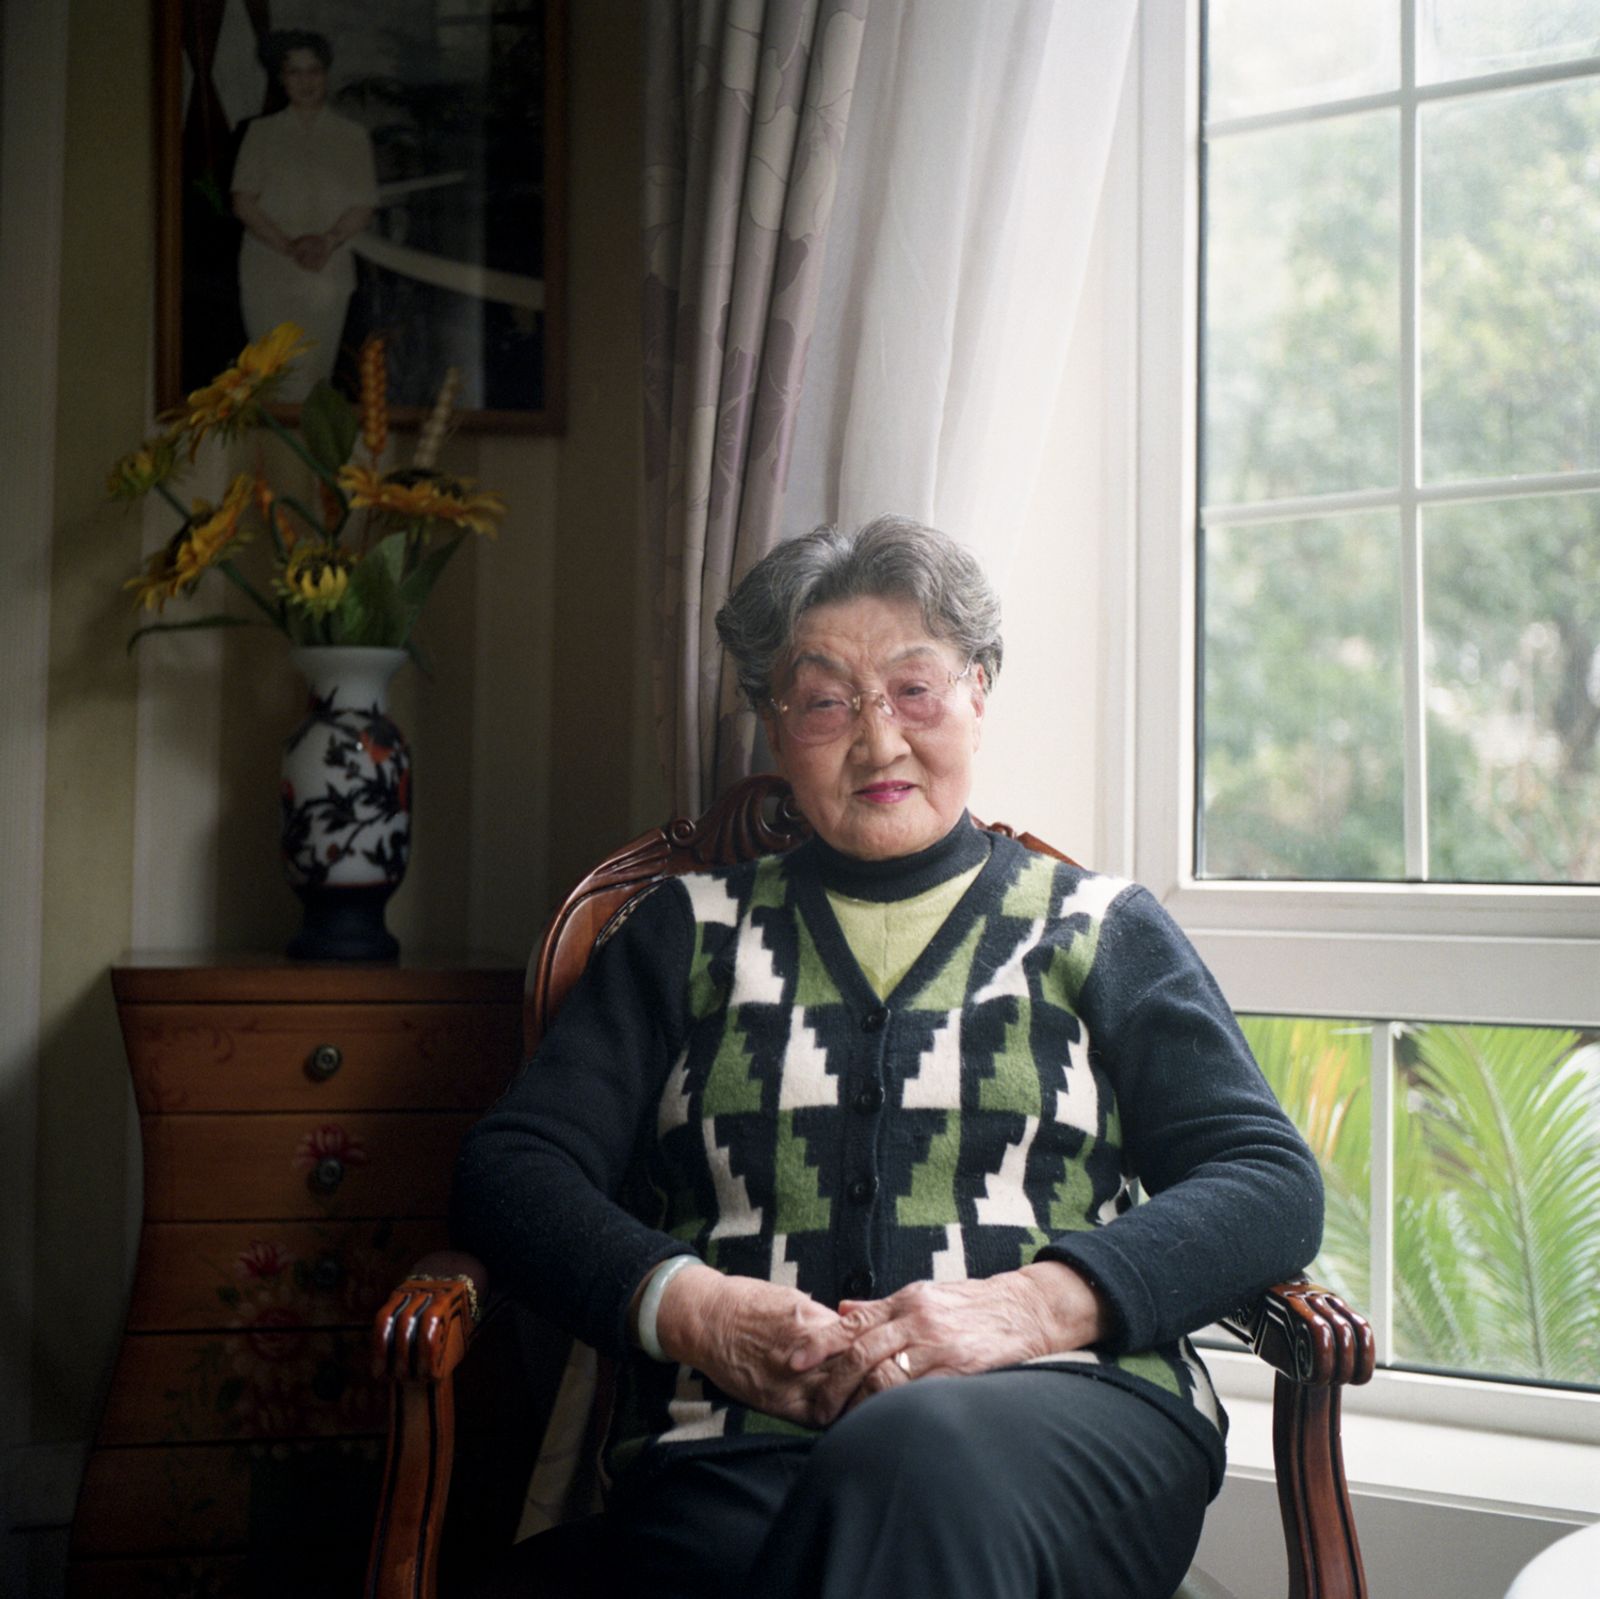 © Yang Zhou - Image from the How to Grow Old photography project